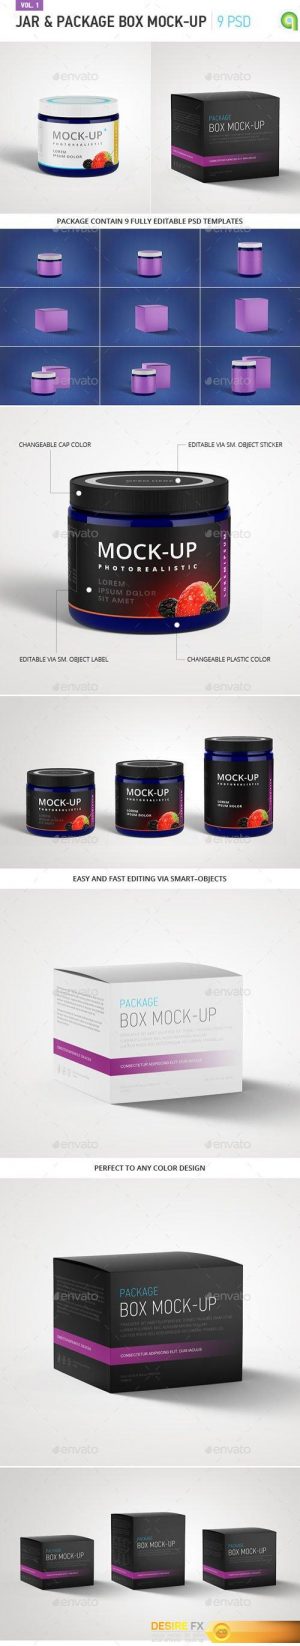 Jar and Package Box Mock-Up 11052884